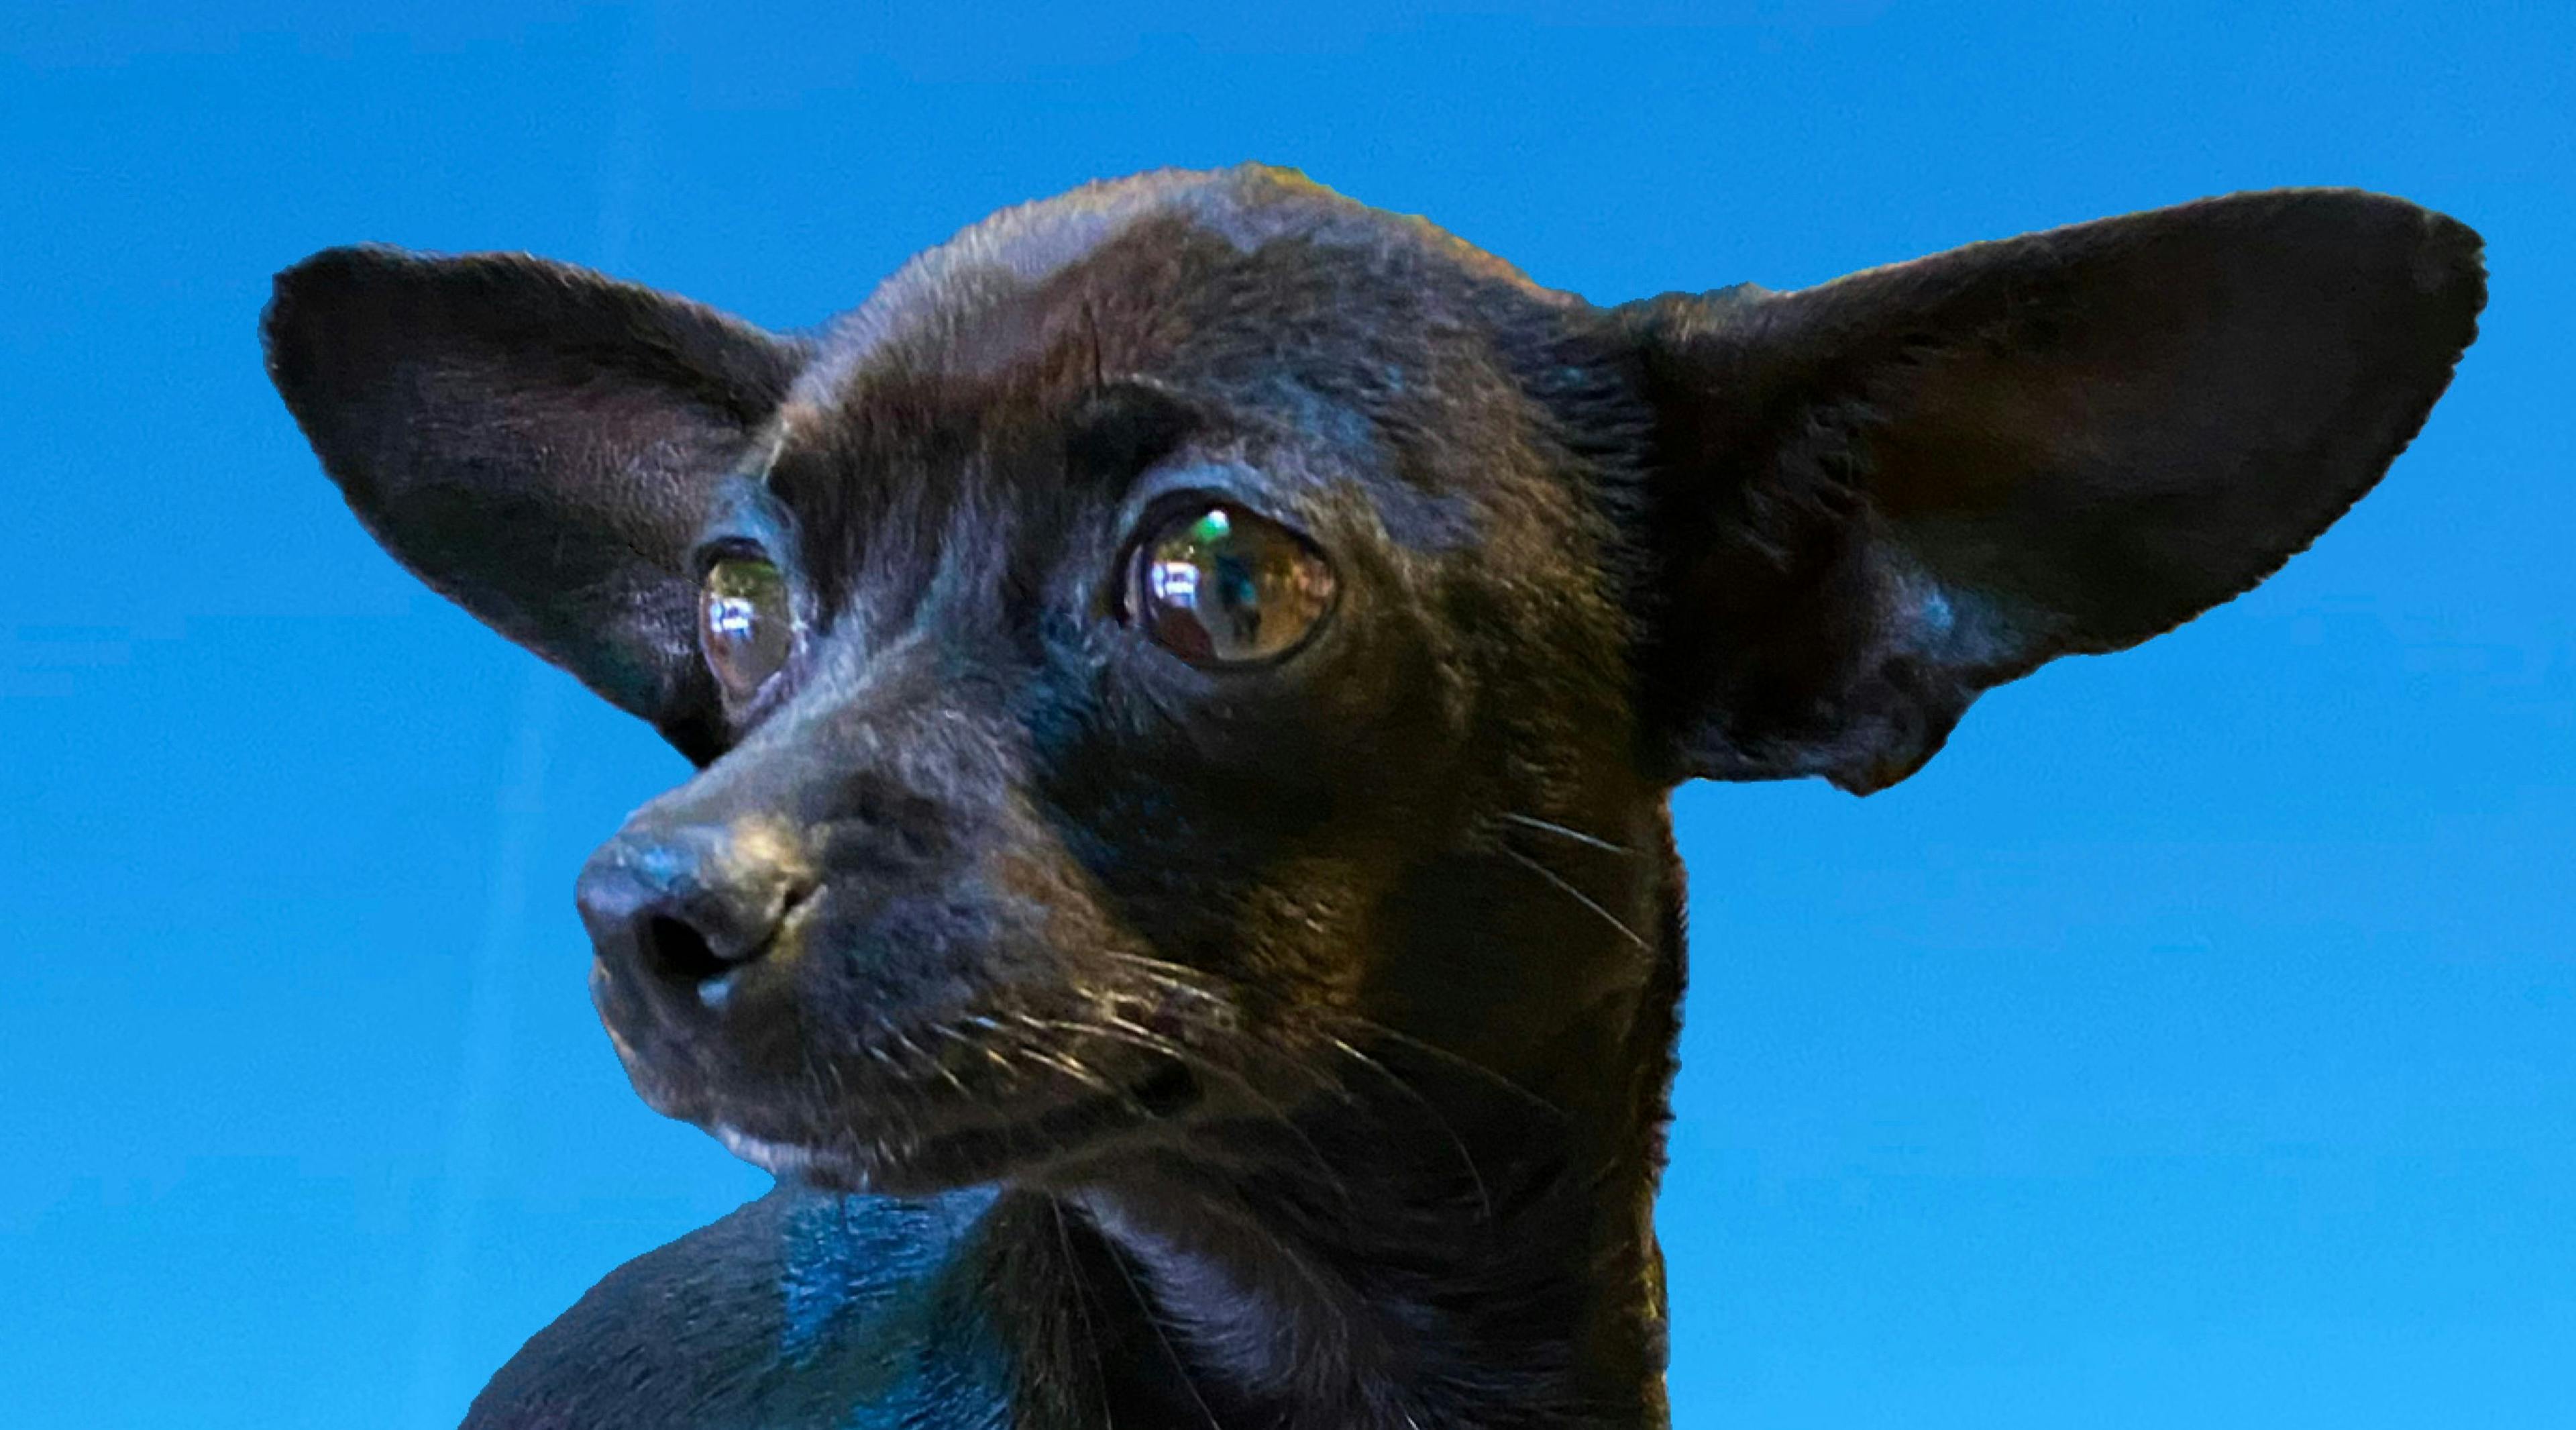 A black Chihuahua dog with large ears.